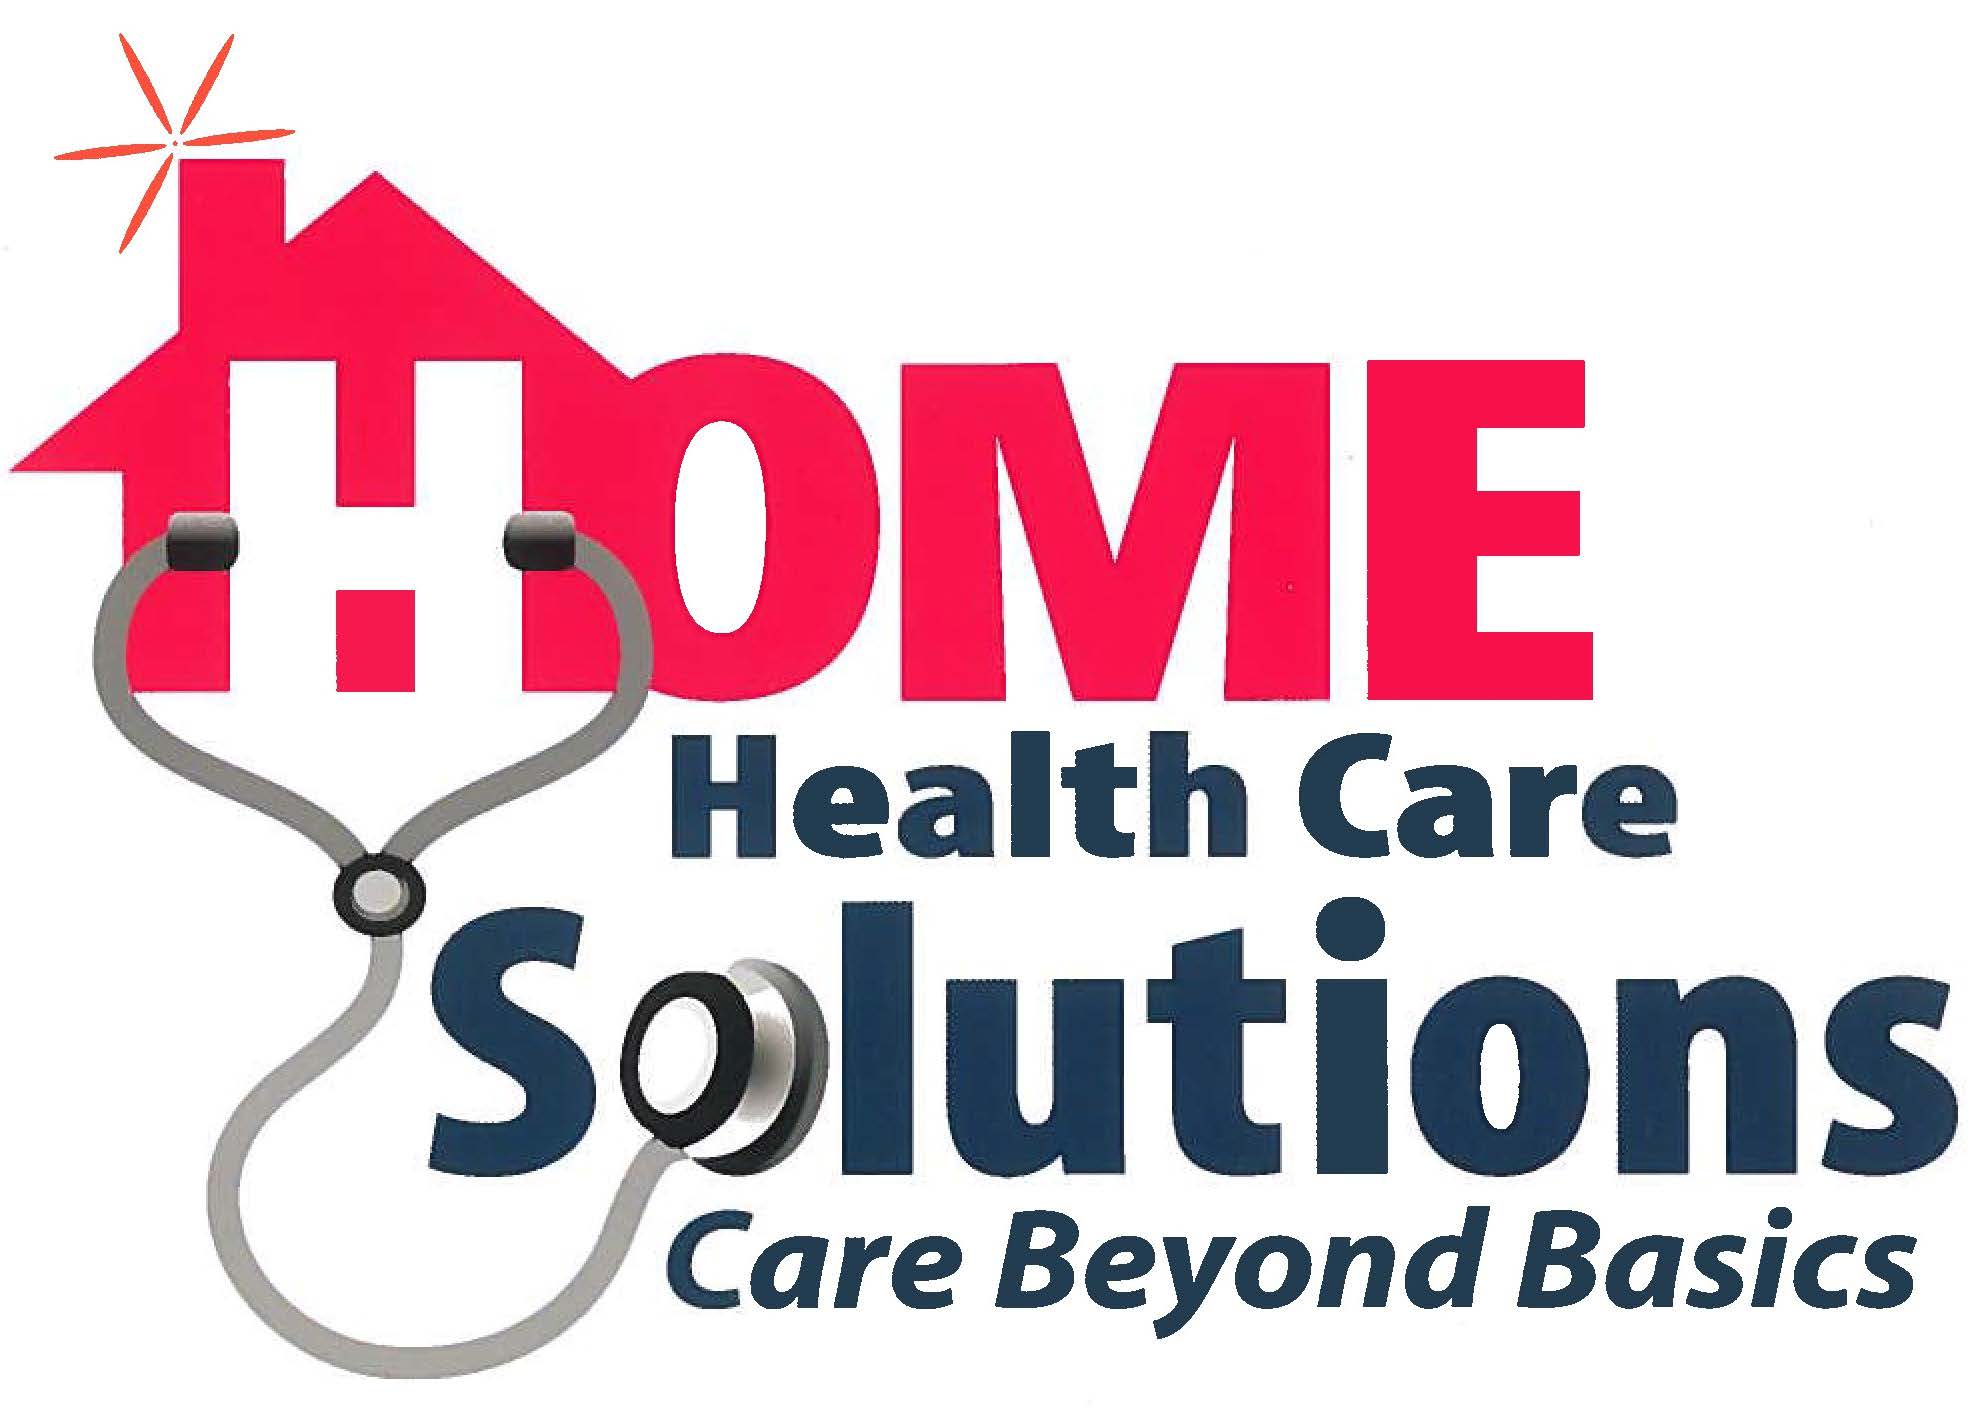 home-health-care-solutions-image-1